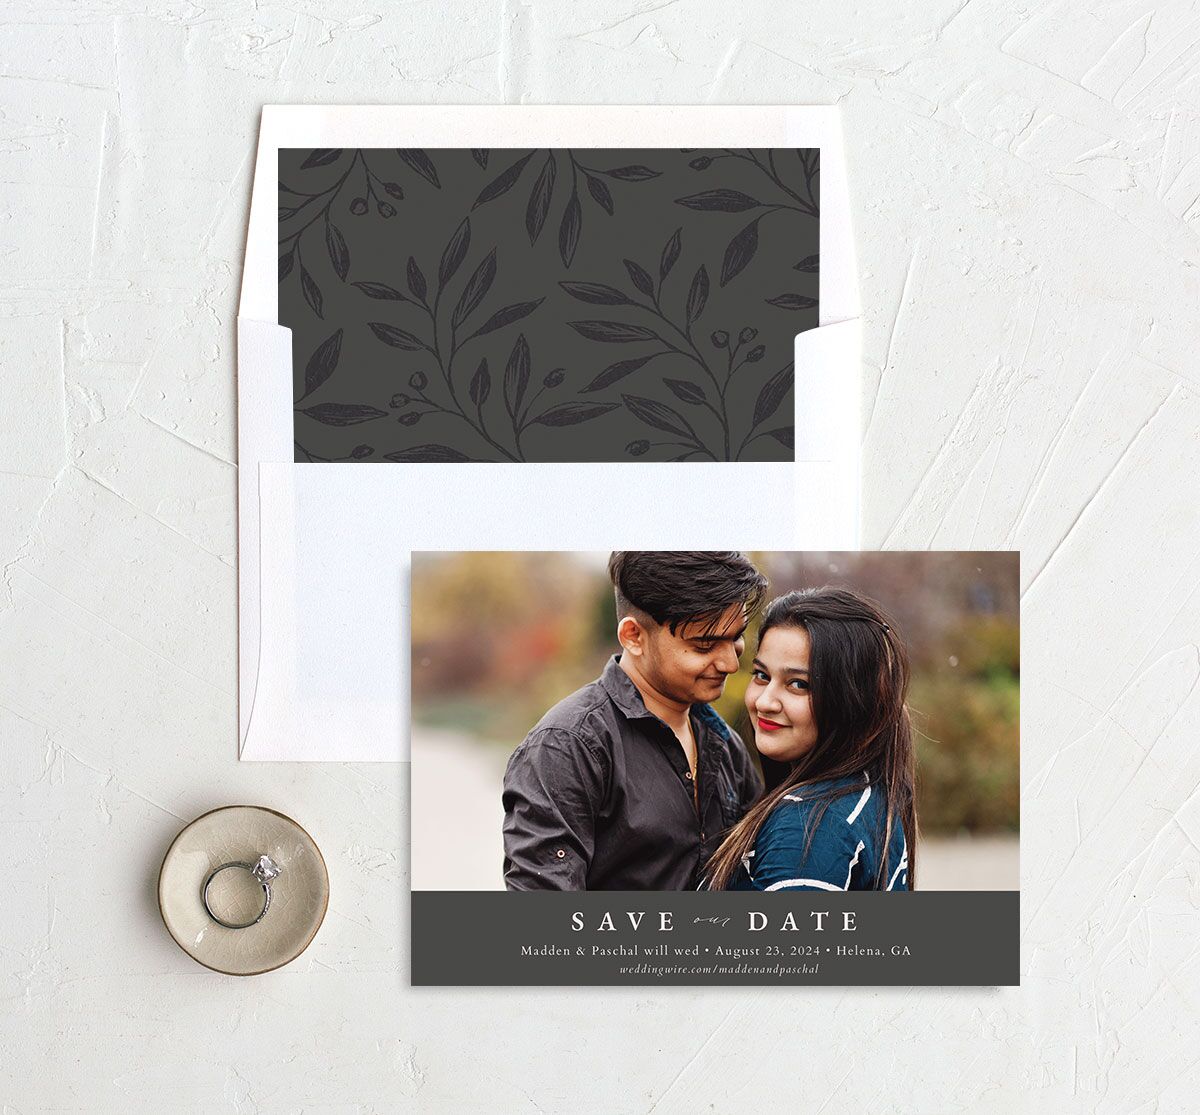 Timeless Monogram Save the Date Cards [object Object] in Grey